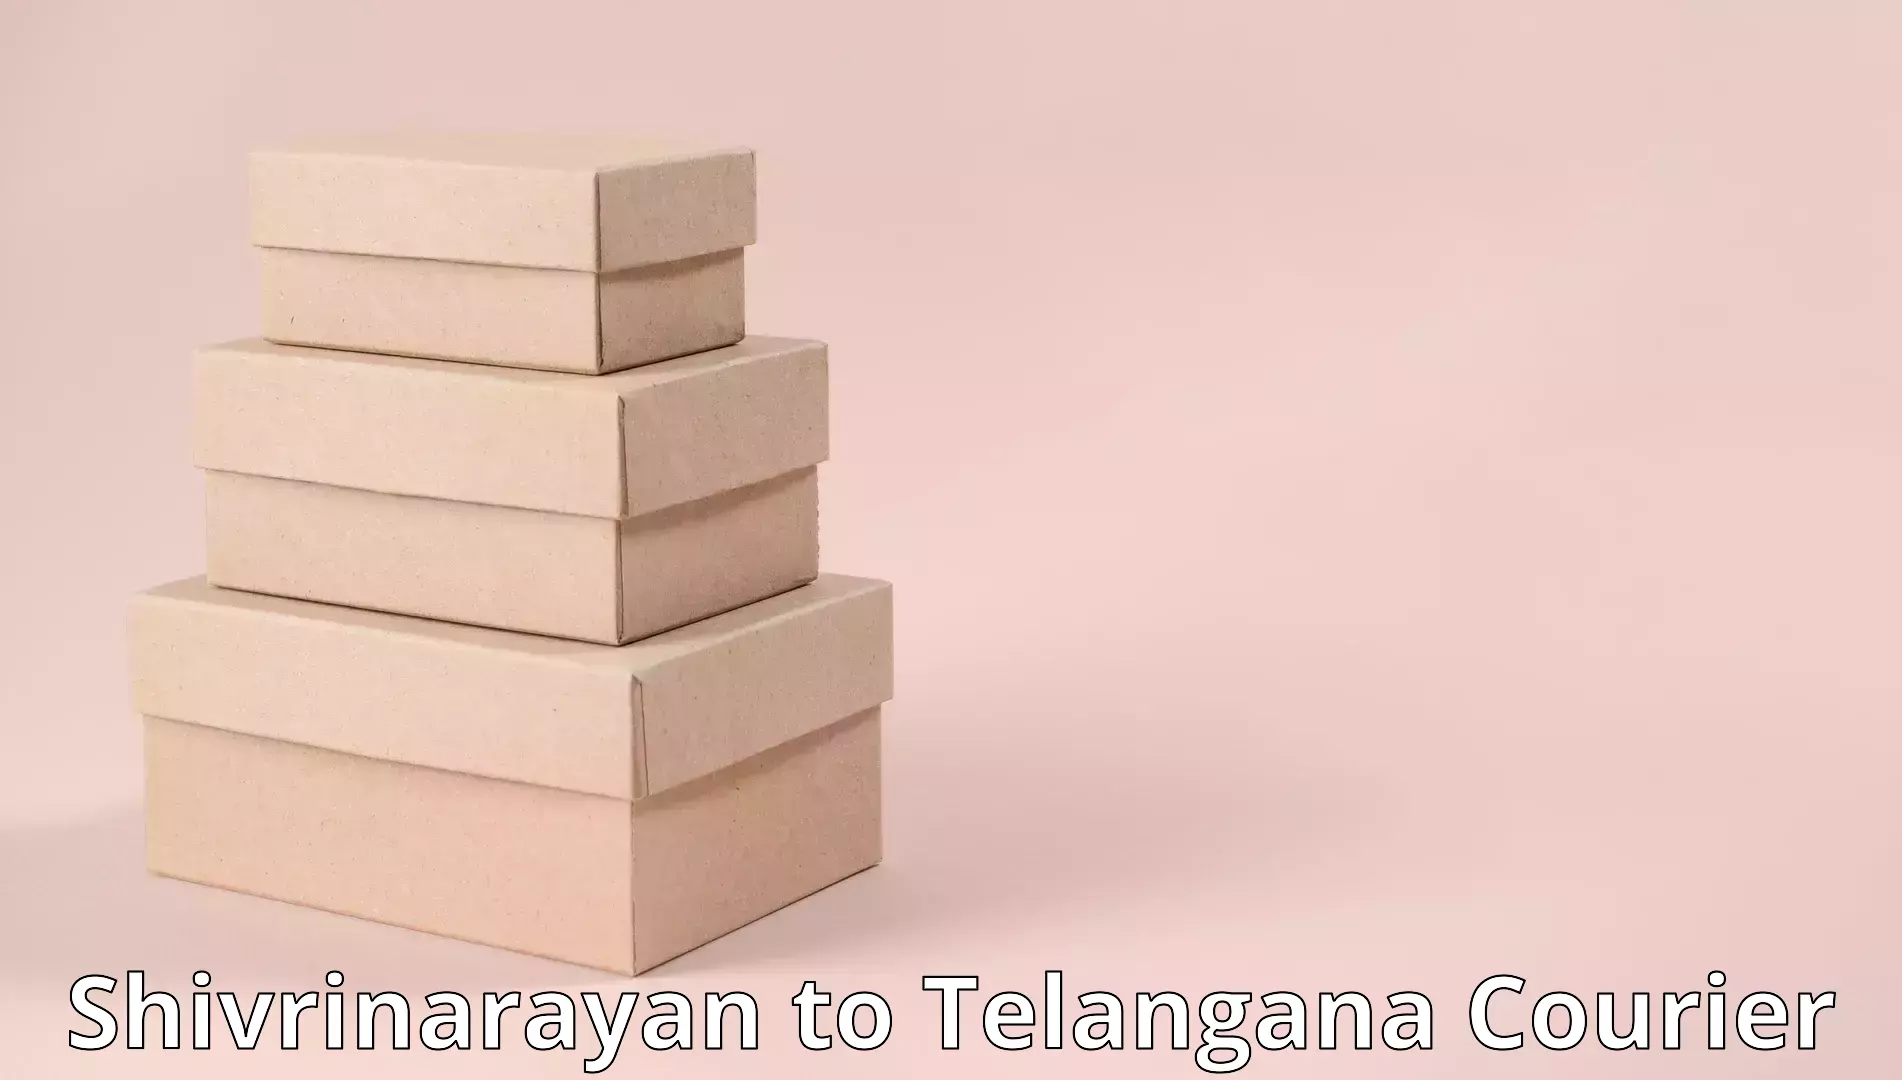 High-quality moving services in Shivrinarayan to Telangana